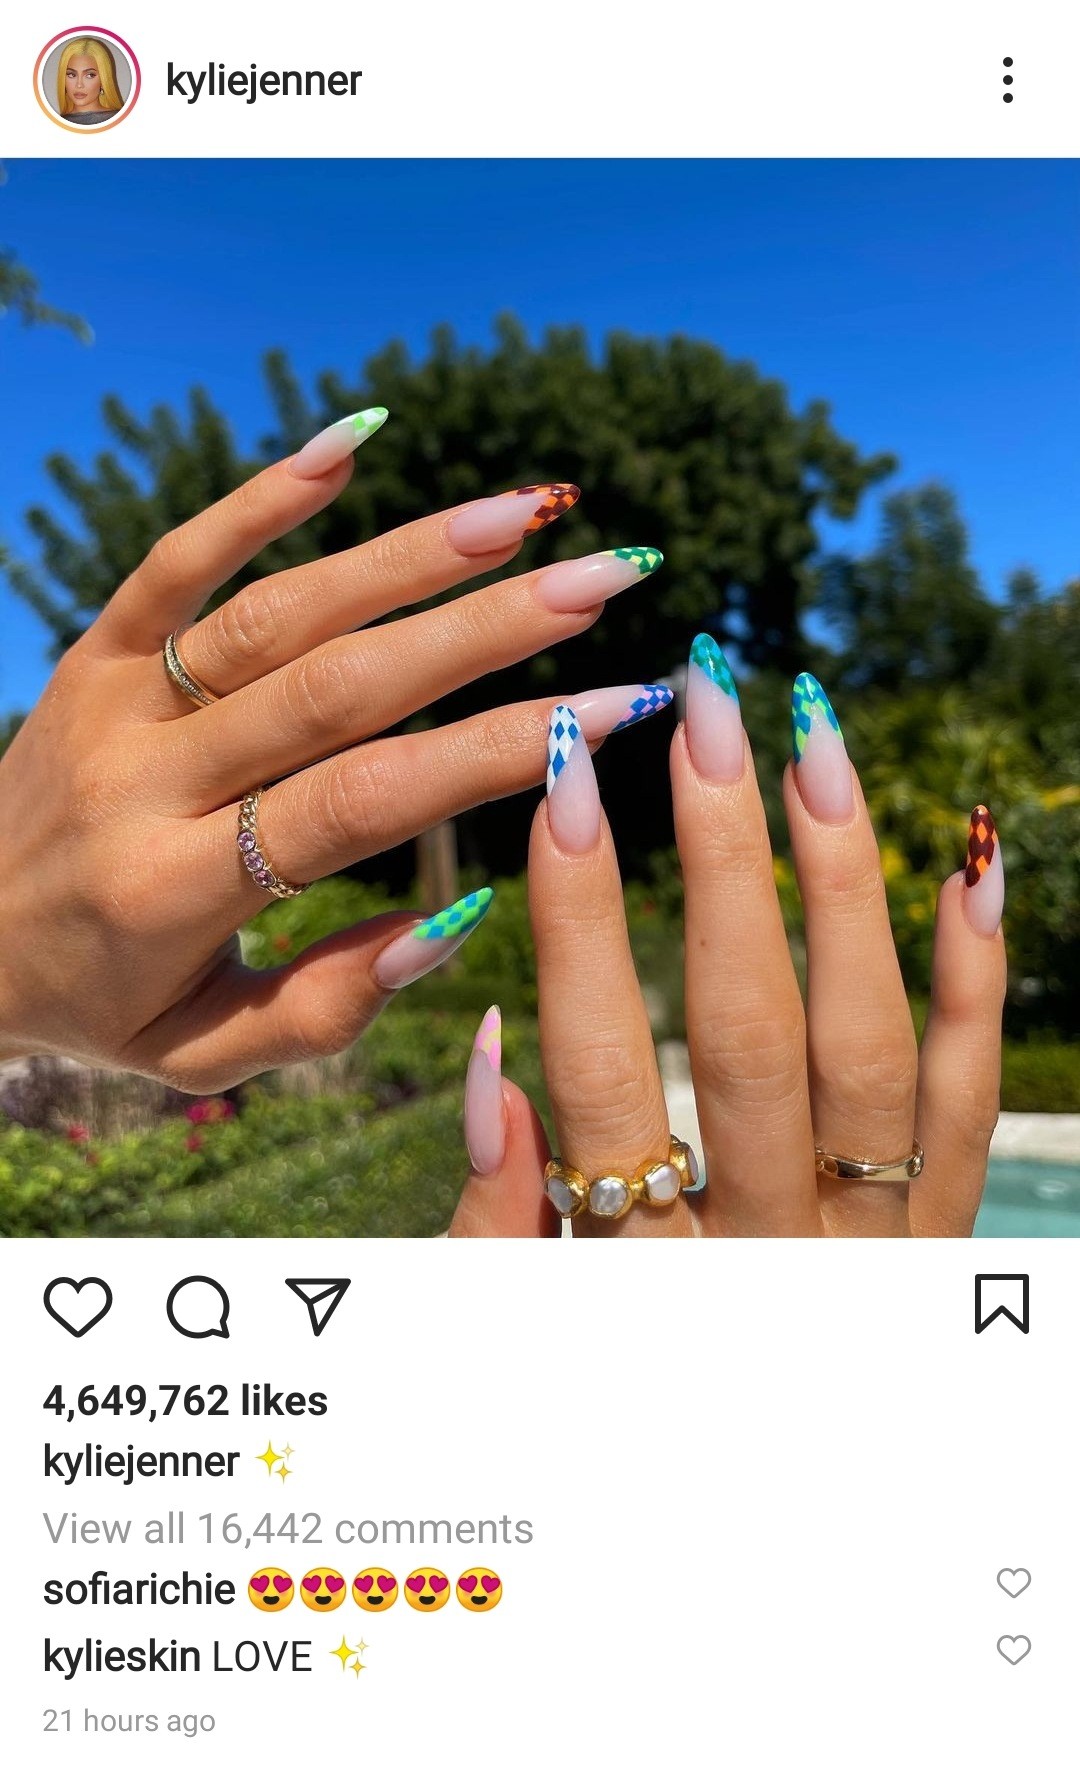 Kylie shared her funky nail art's picture on Instagram